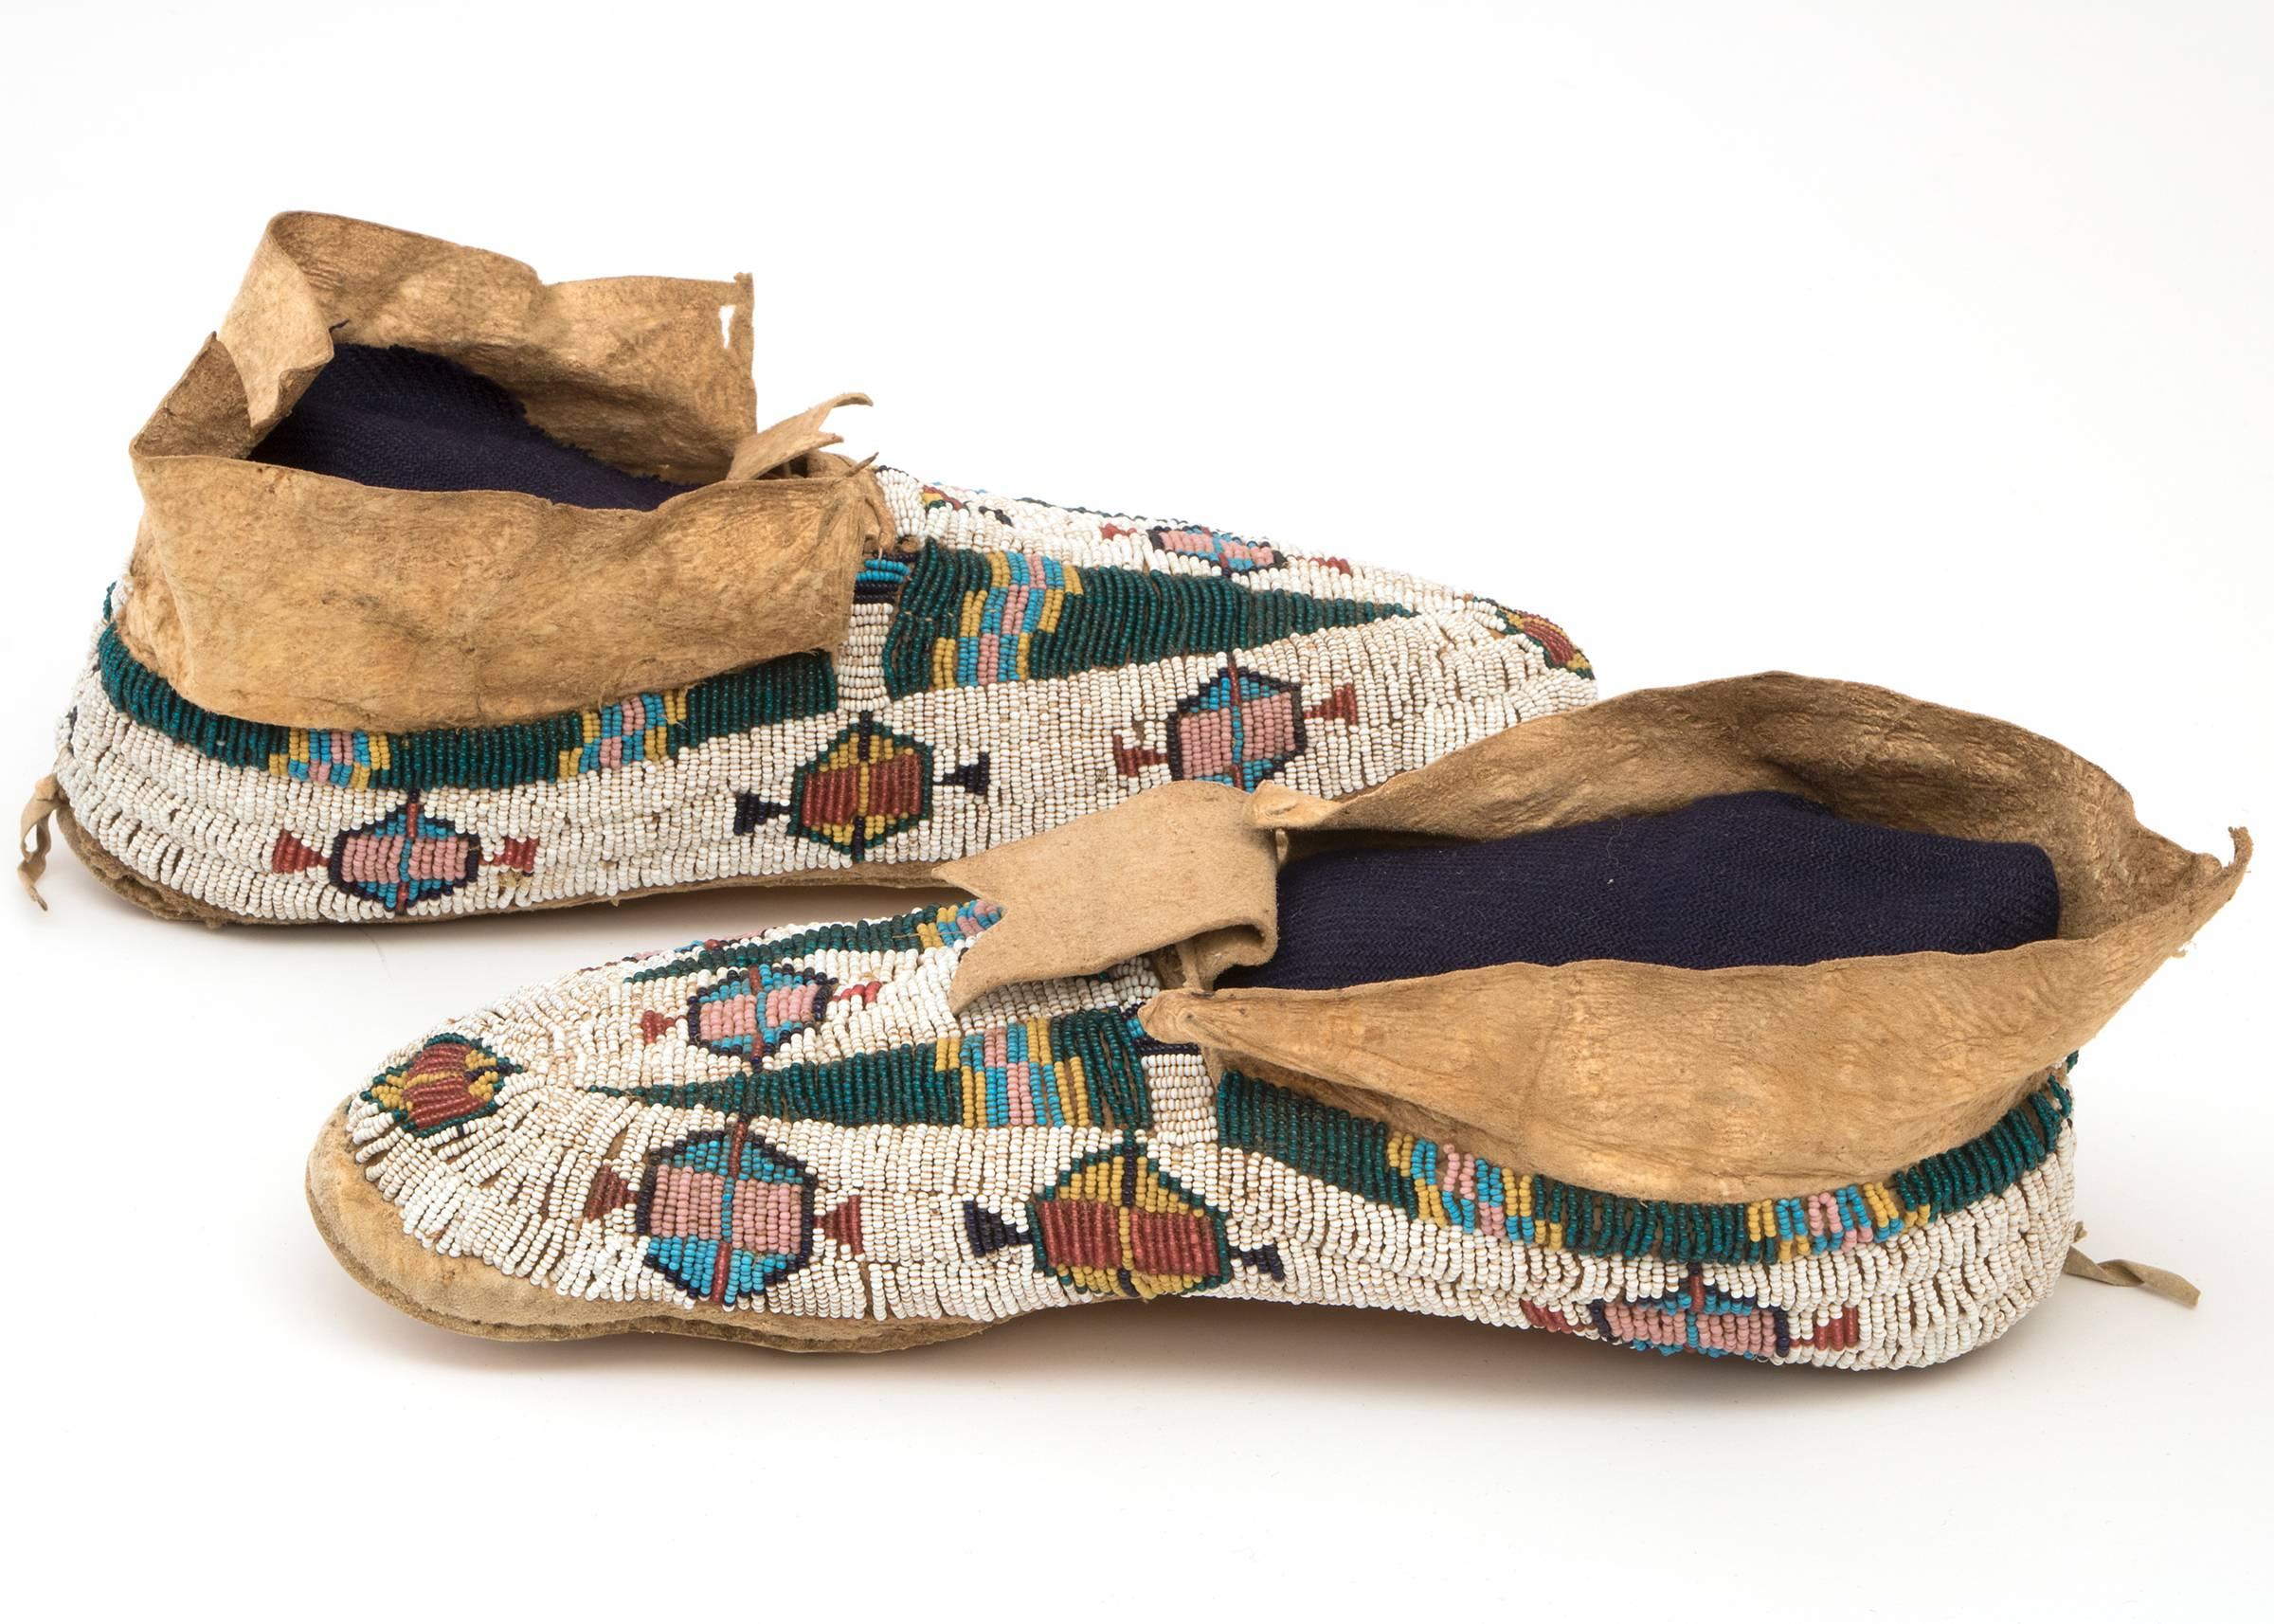 Hide Antique Native American Pictorial Beaded Moccasins, Cheyenne, 19th Century